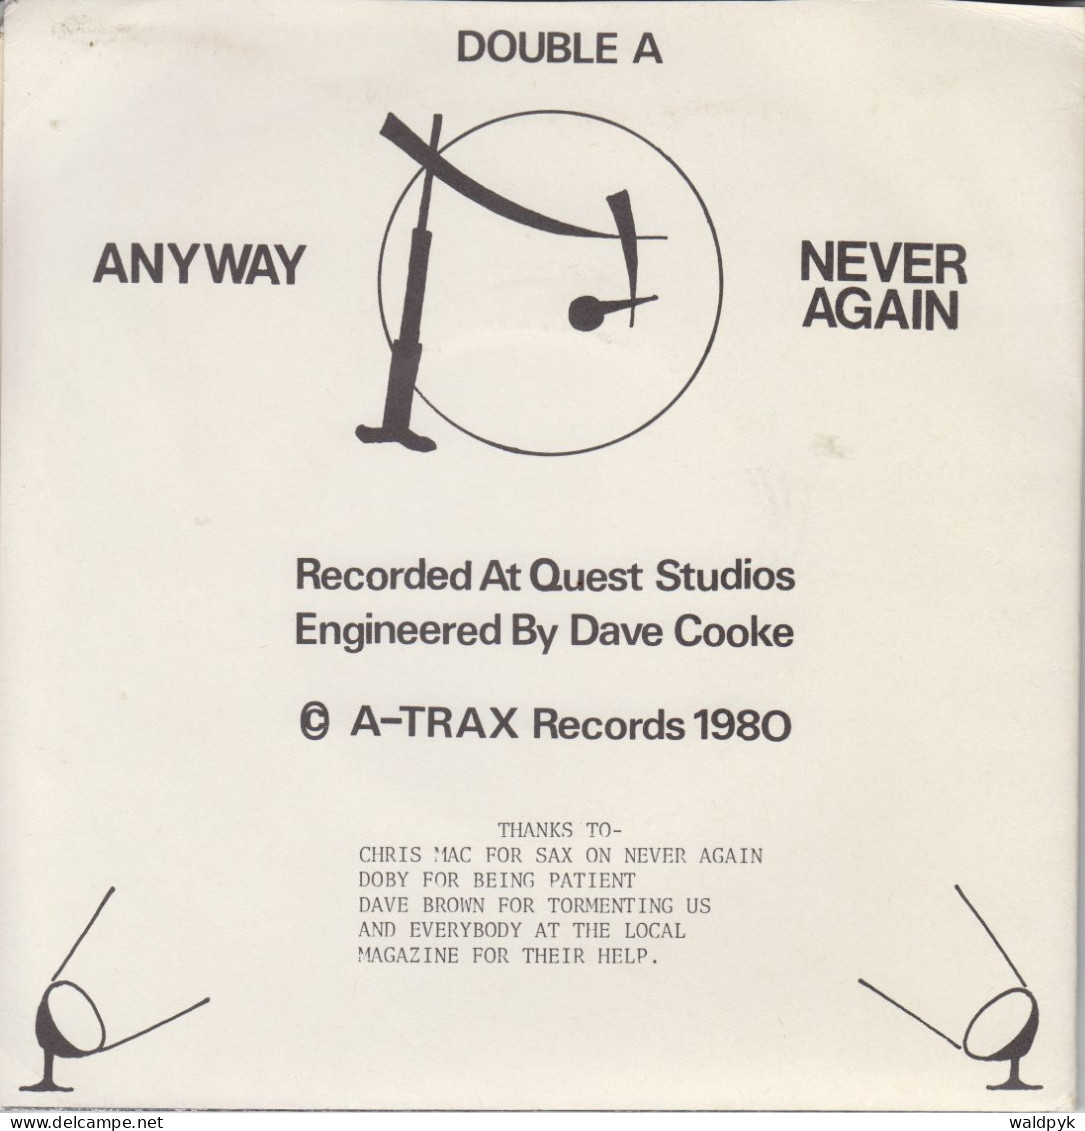 ACME ATTRACTIONS - Anyway - Autres - Musique Anglaise